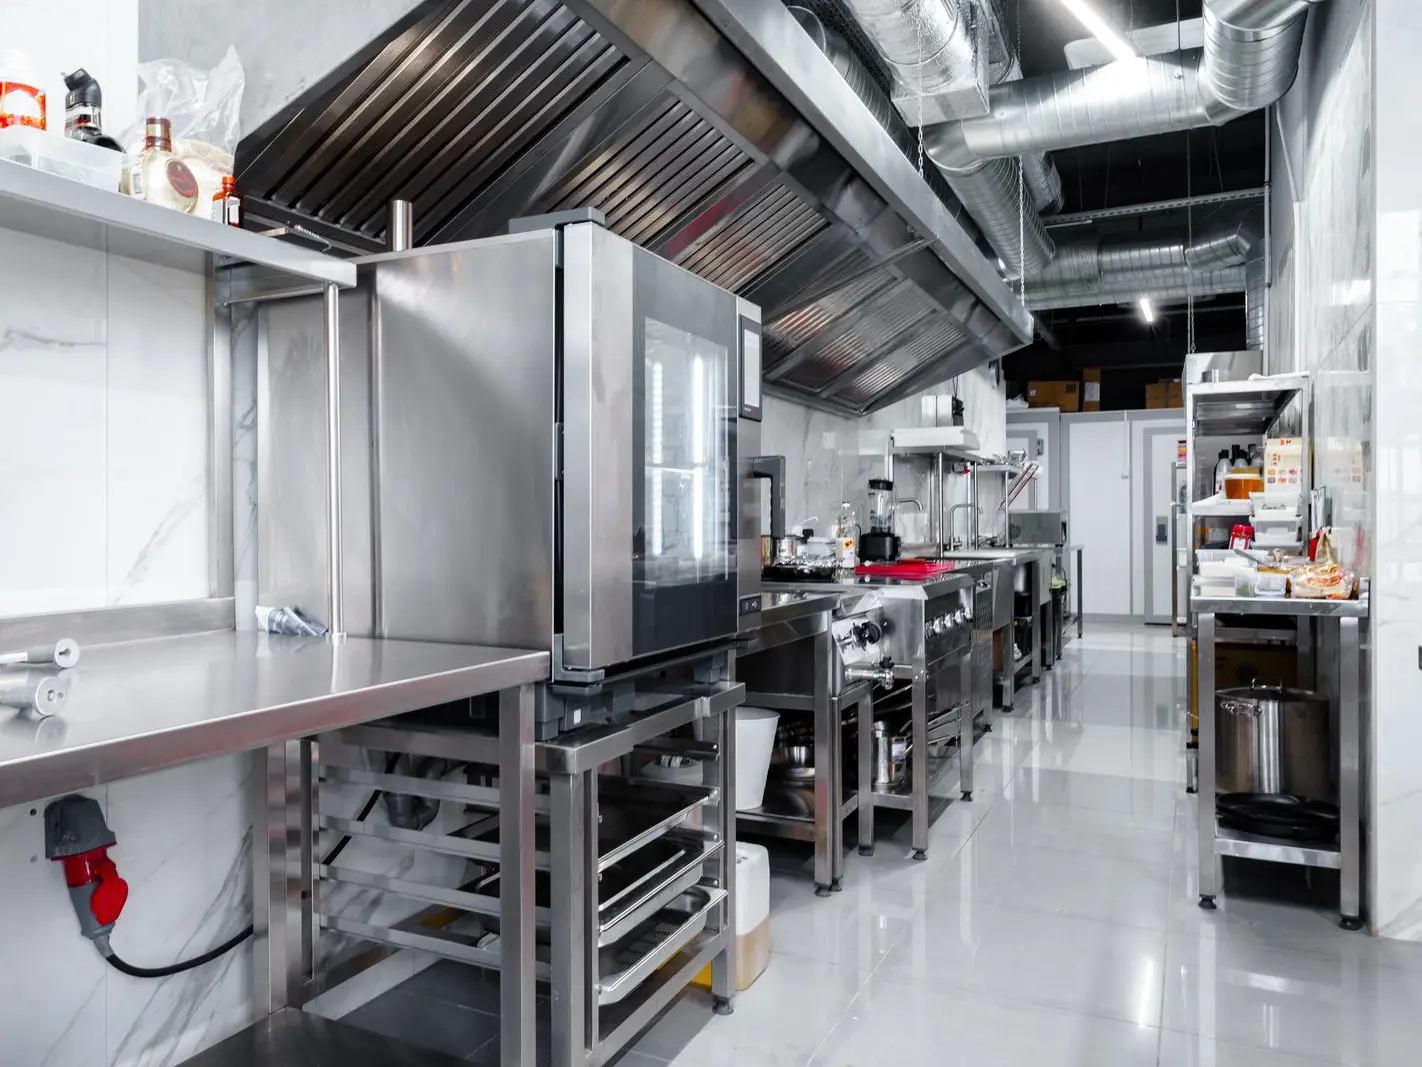 Modern commercial kitchen with sleek stainless steel appliances for efficient cooking.